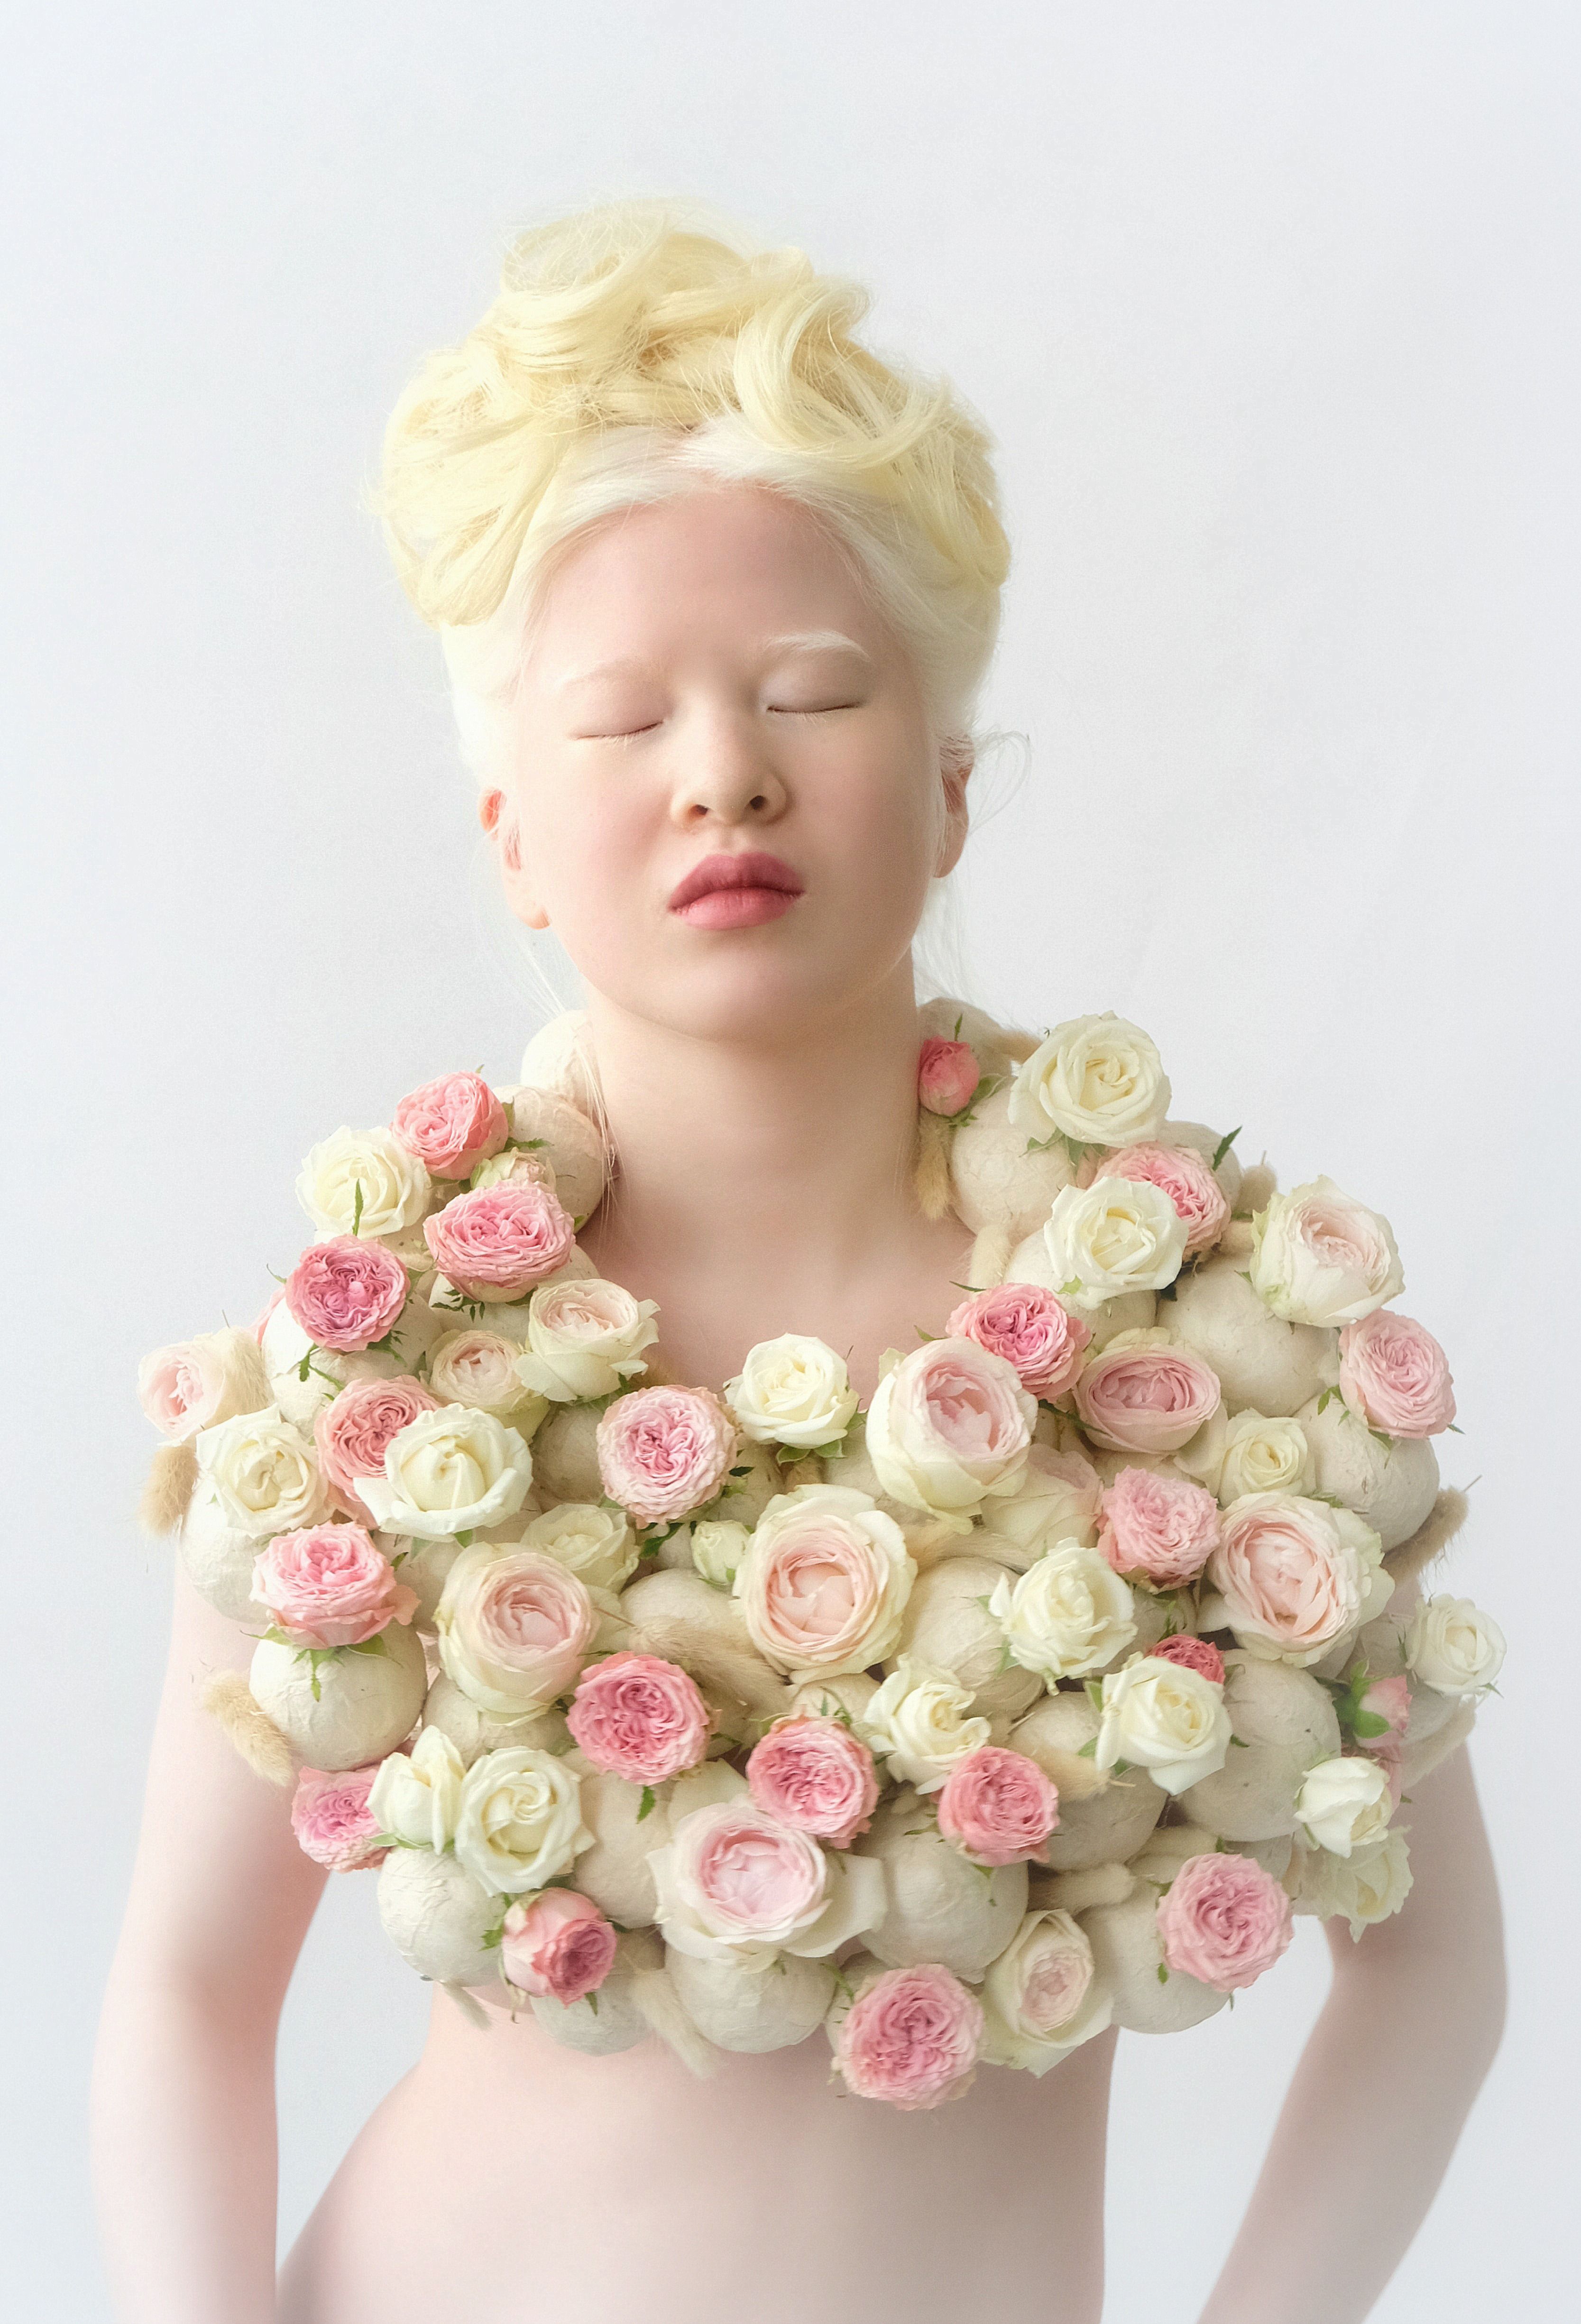 Albino girl who was abandoned by her parents becomes a top model, see photos.